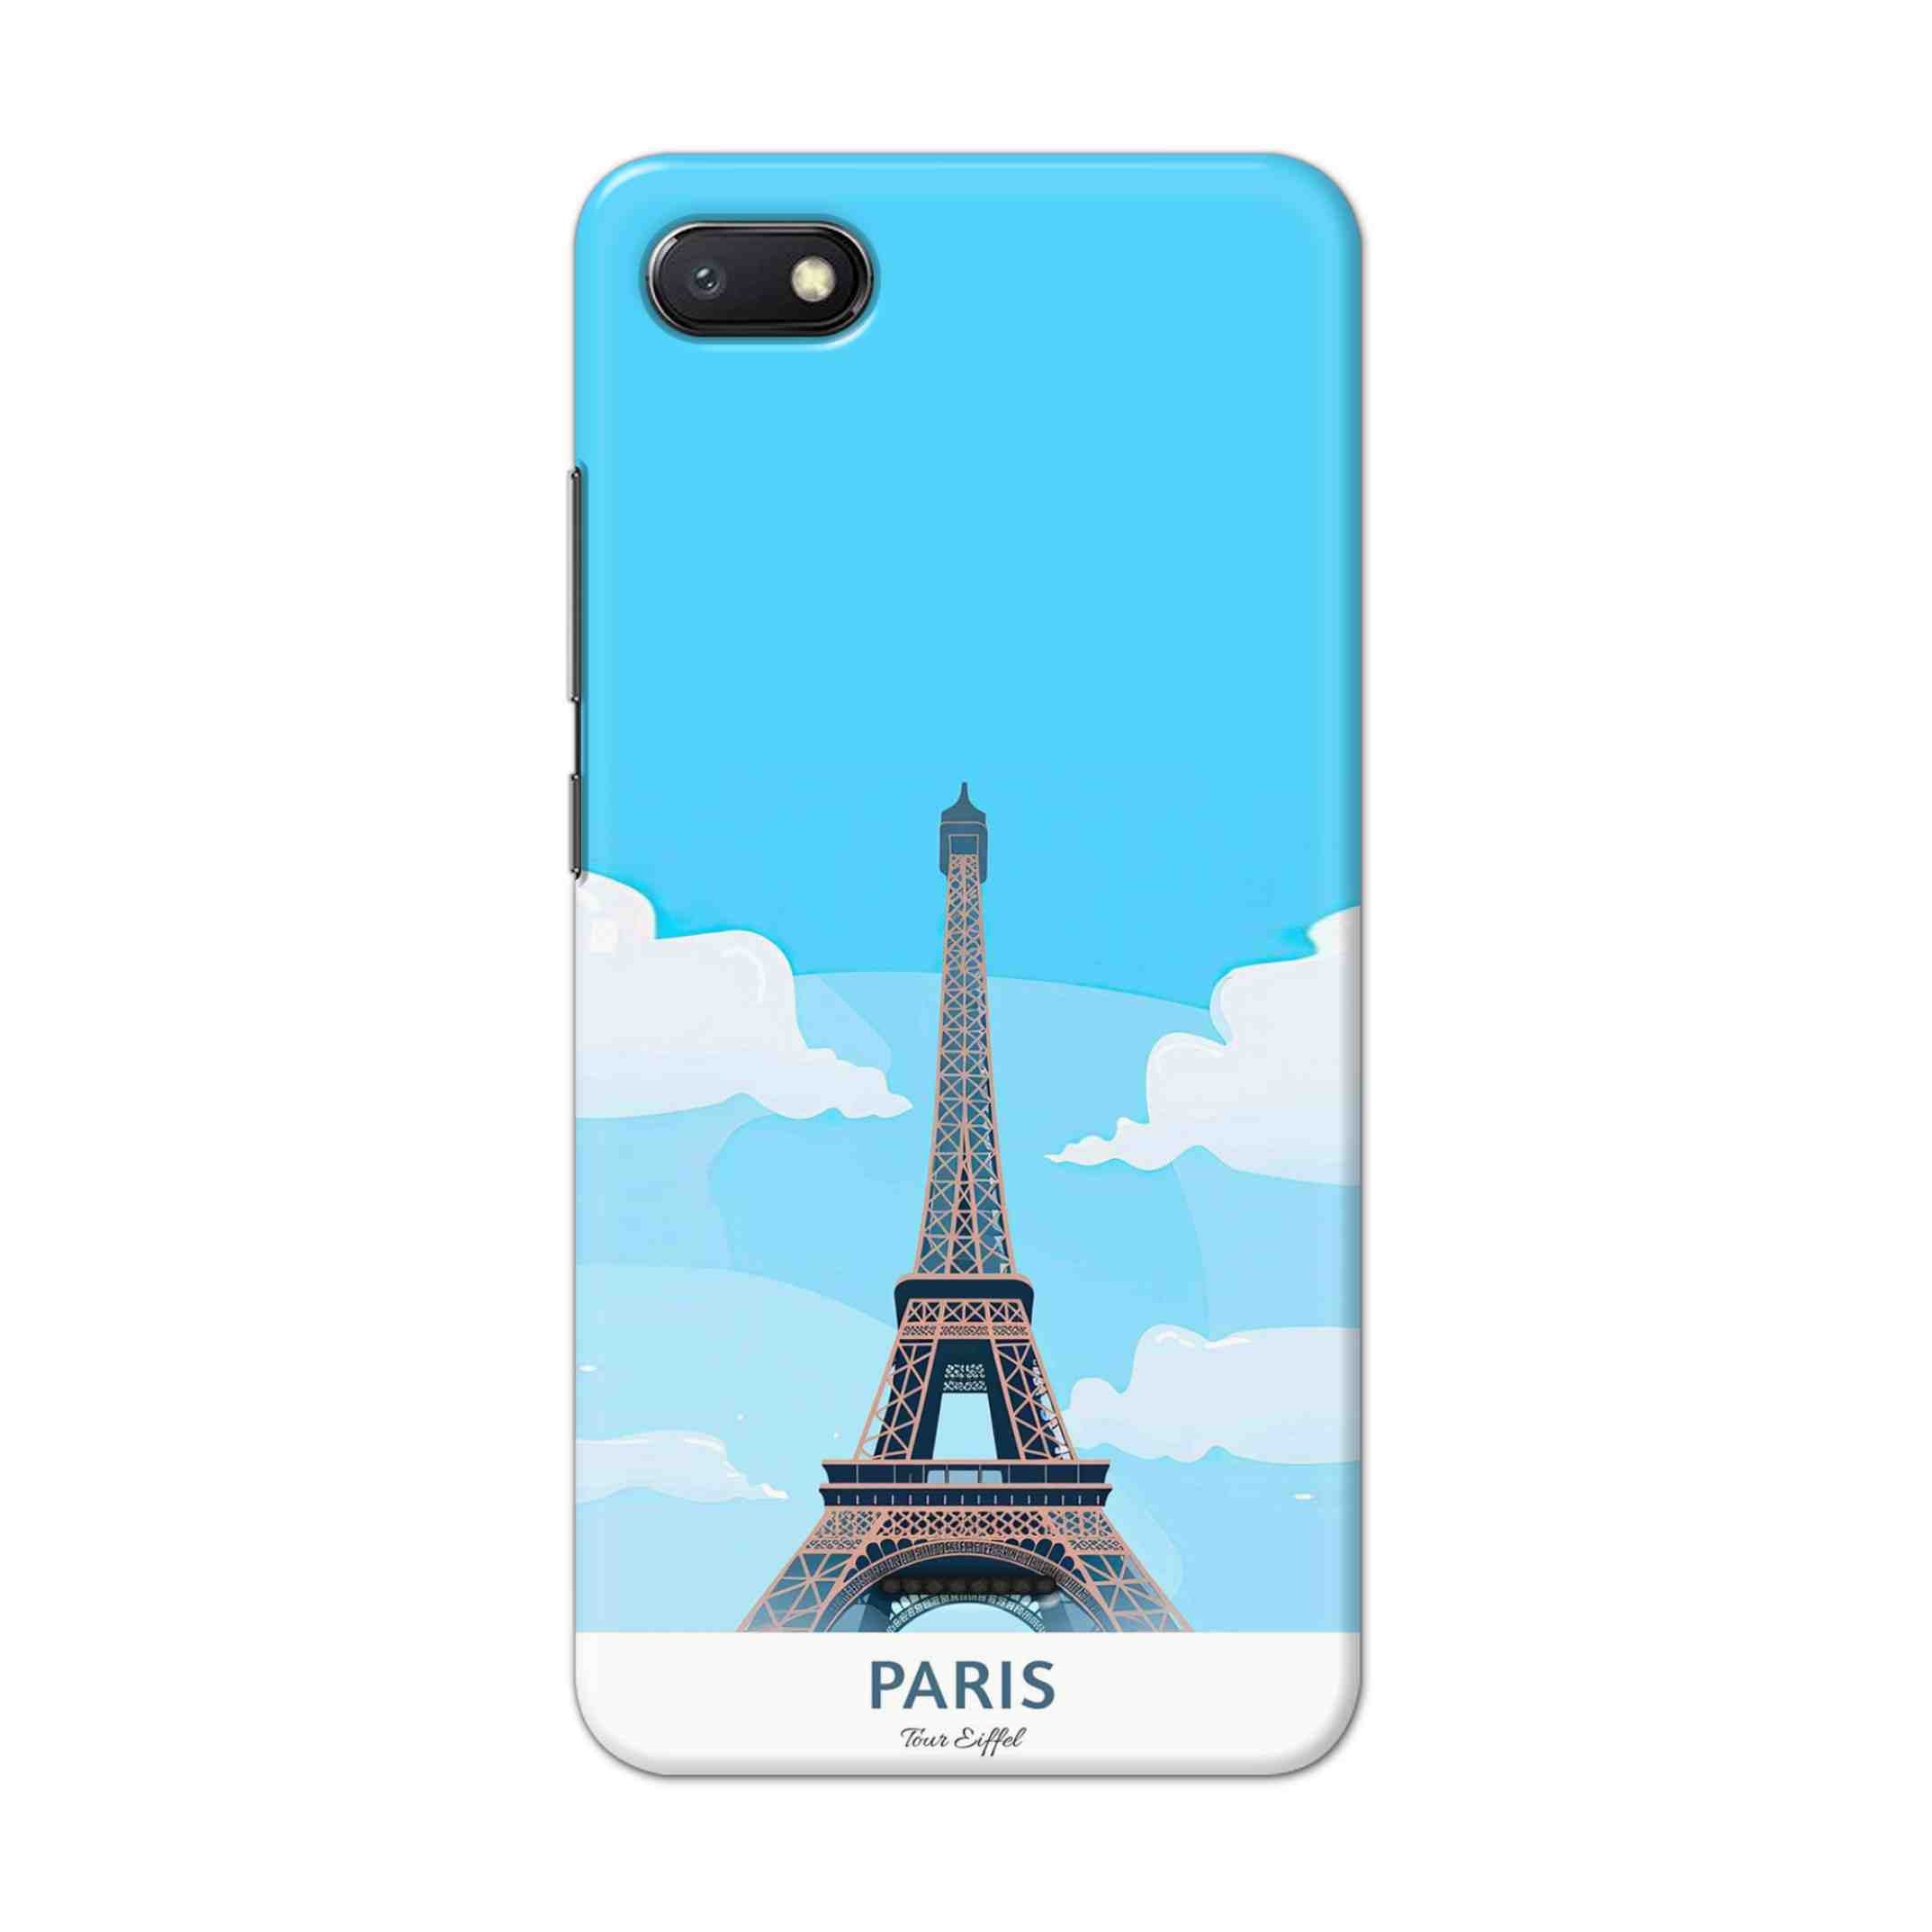 Buy Paris Hard Back Mobile Phone Case/Cover For Xiaomi Redmi 6A Online